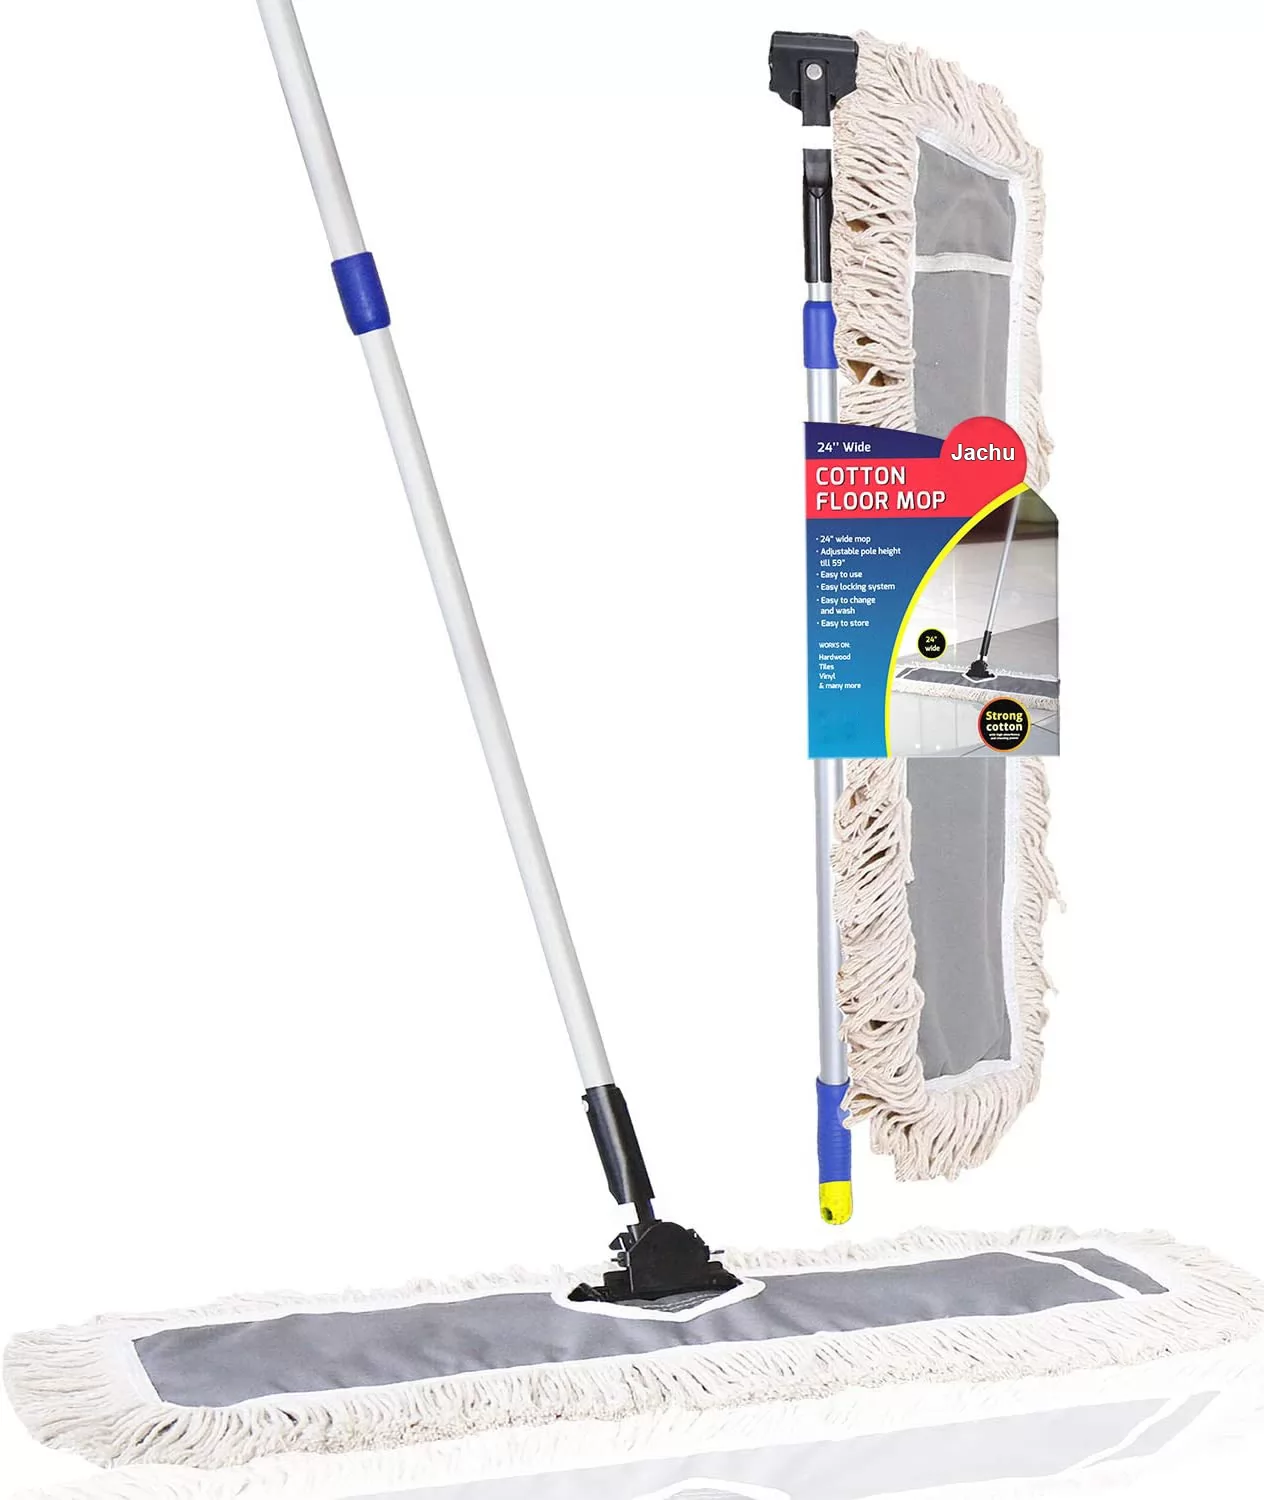 Jachu Premium 24-inch Industrial Class Cotton Wide Dust Mop Head (24" x 7") Telescopic Pole Height Max 61" | For Home, Office, Garage